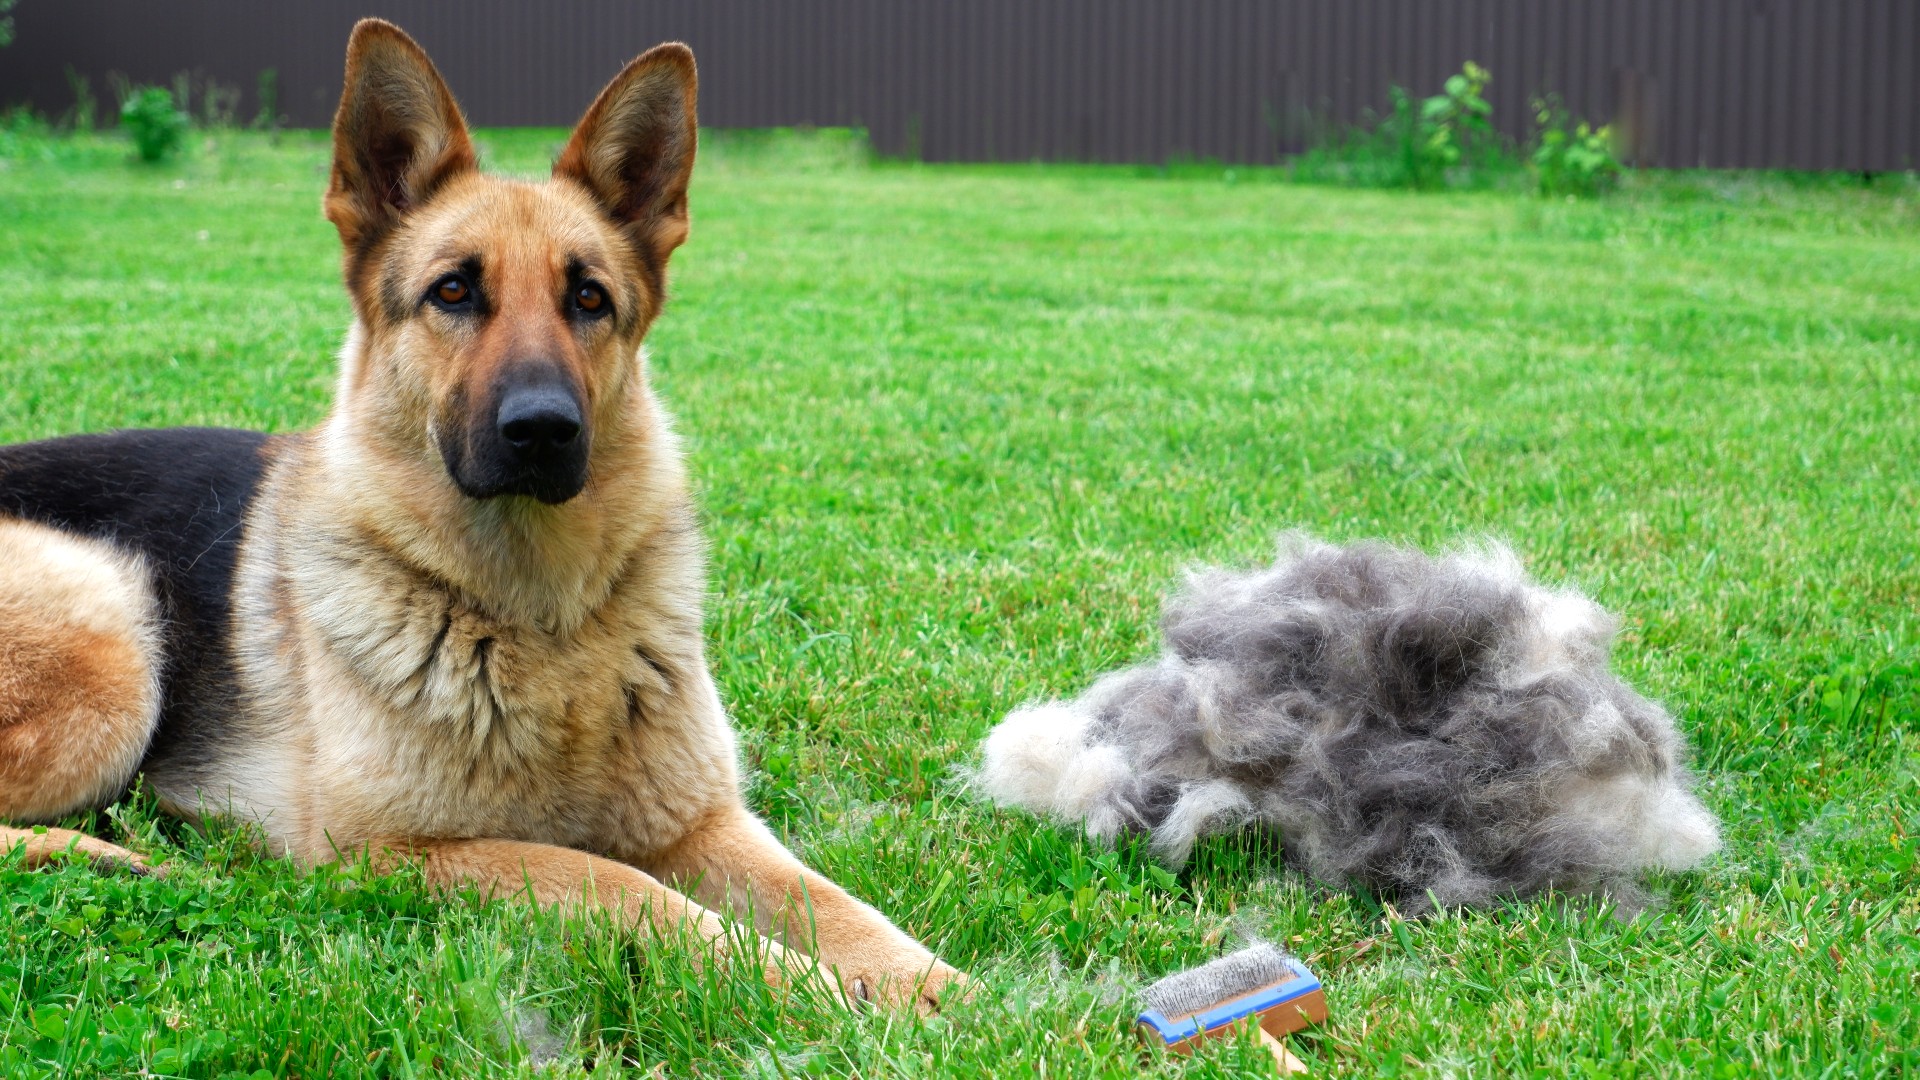 German Shepherd sitting outside next to a pile of their fur